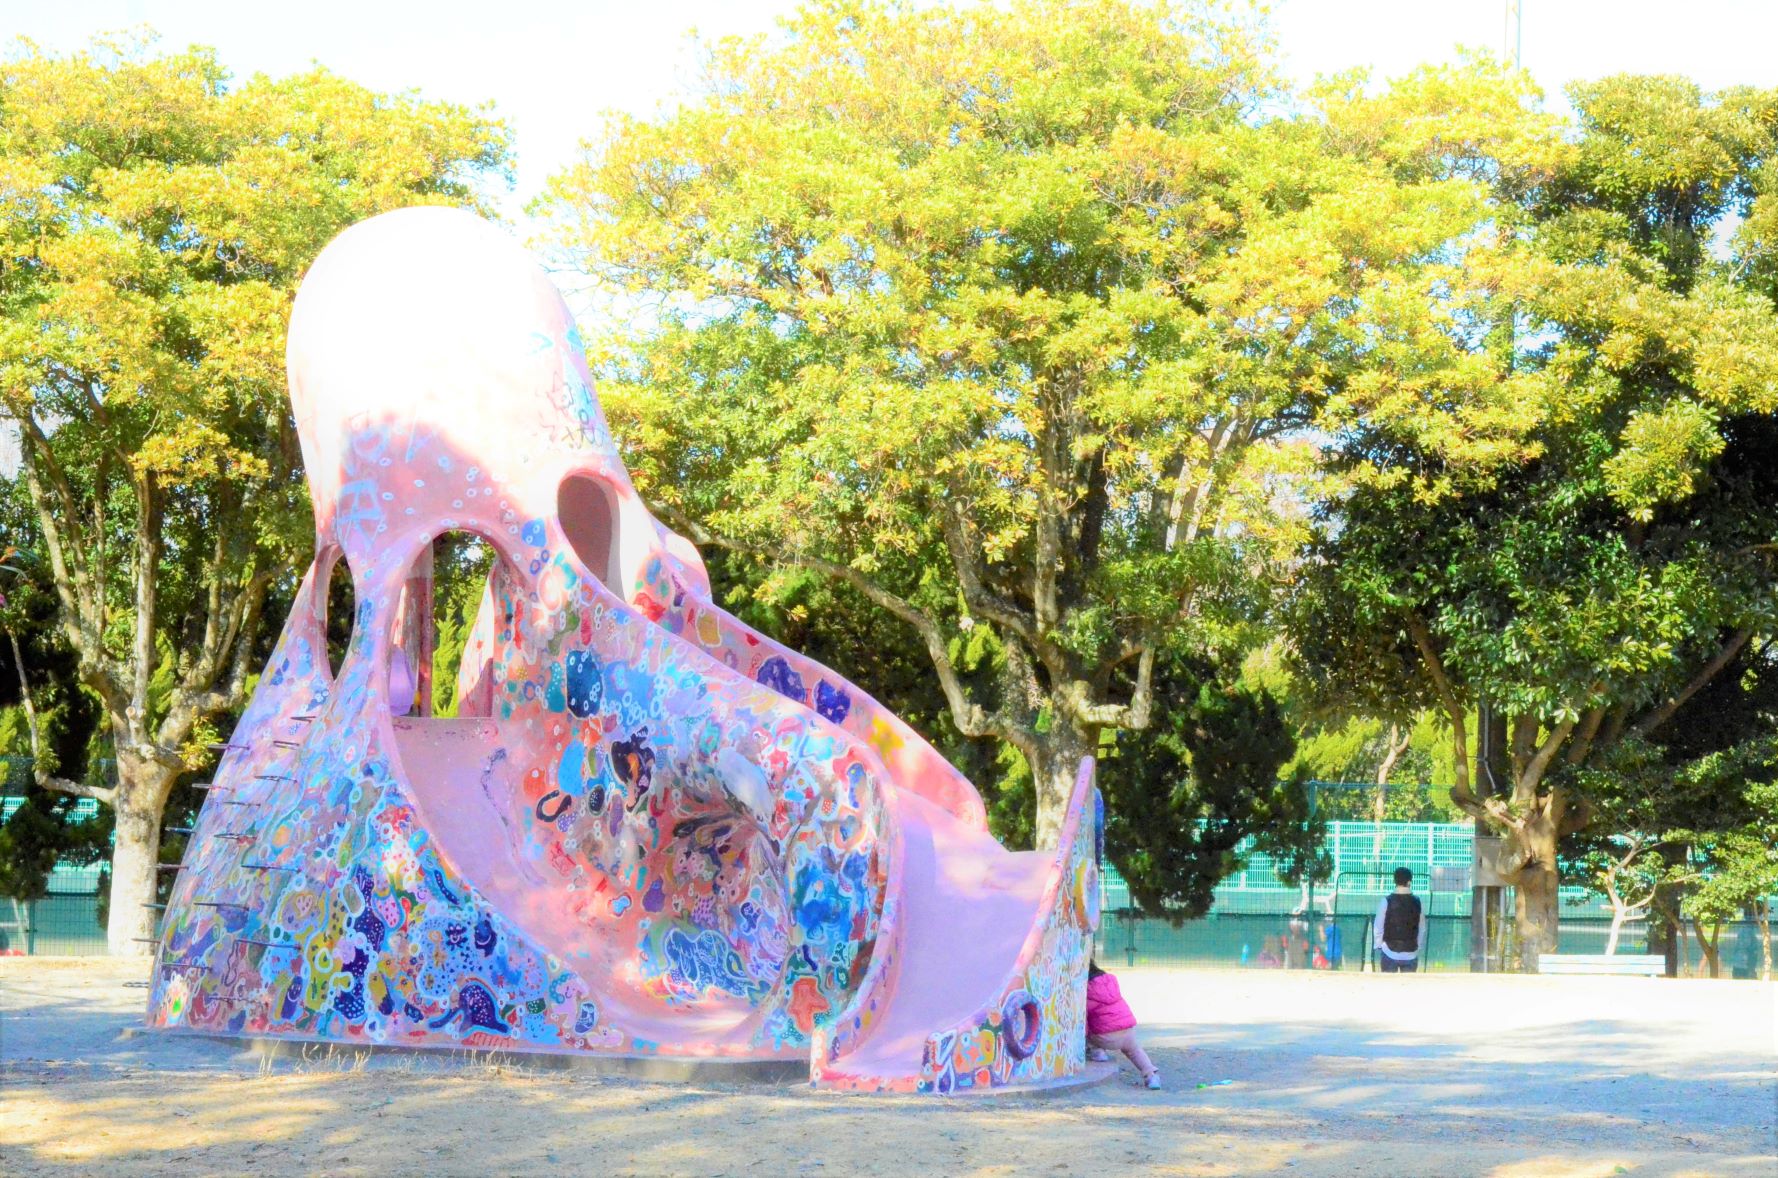 Octopus slide in Anmagawa Park